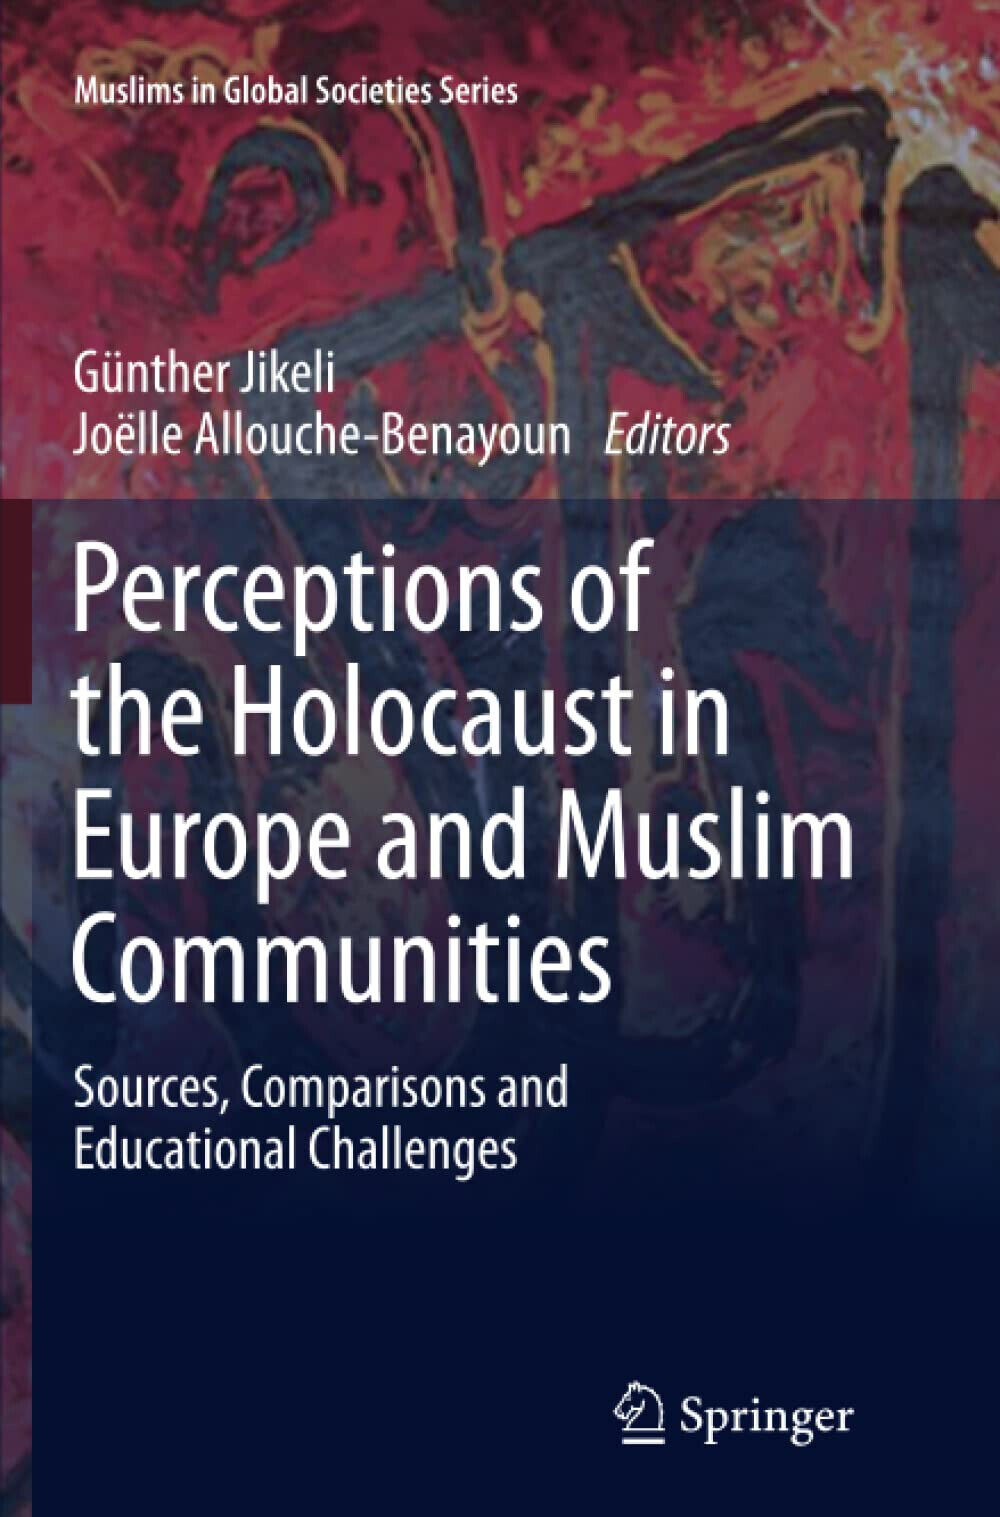 Perceptions of the Holocaust in Europe and Muslim Communities - Springer, 2014